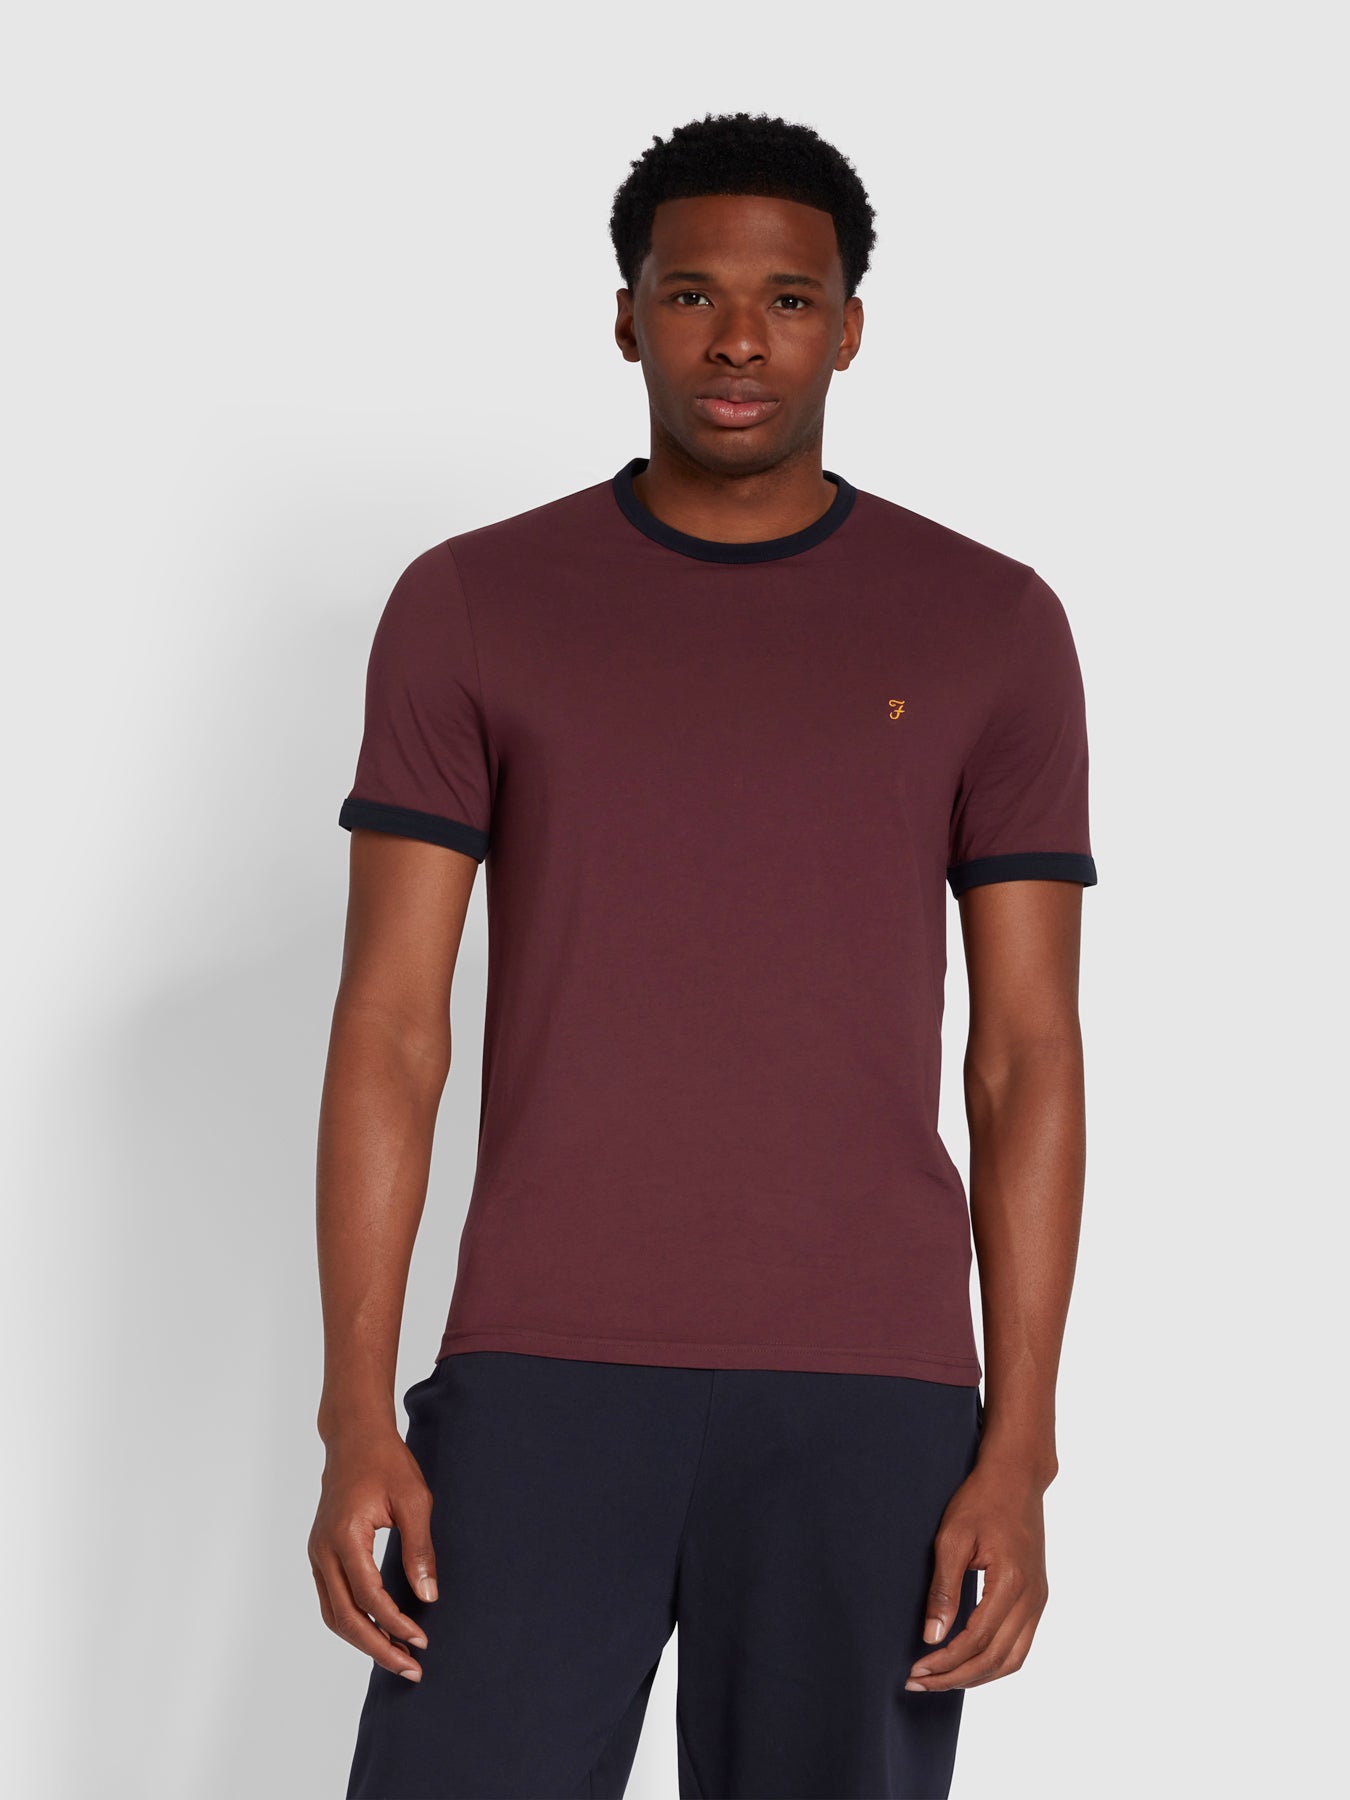 View Groves Slim Fit Organic Cotton Ringer TShirt In Farah Red information